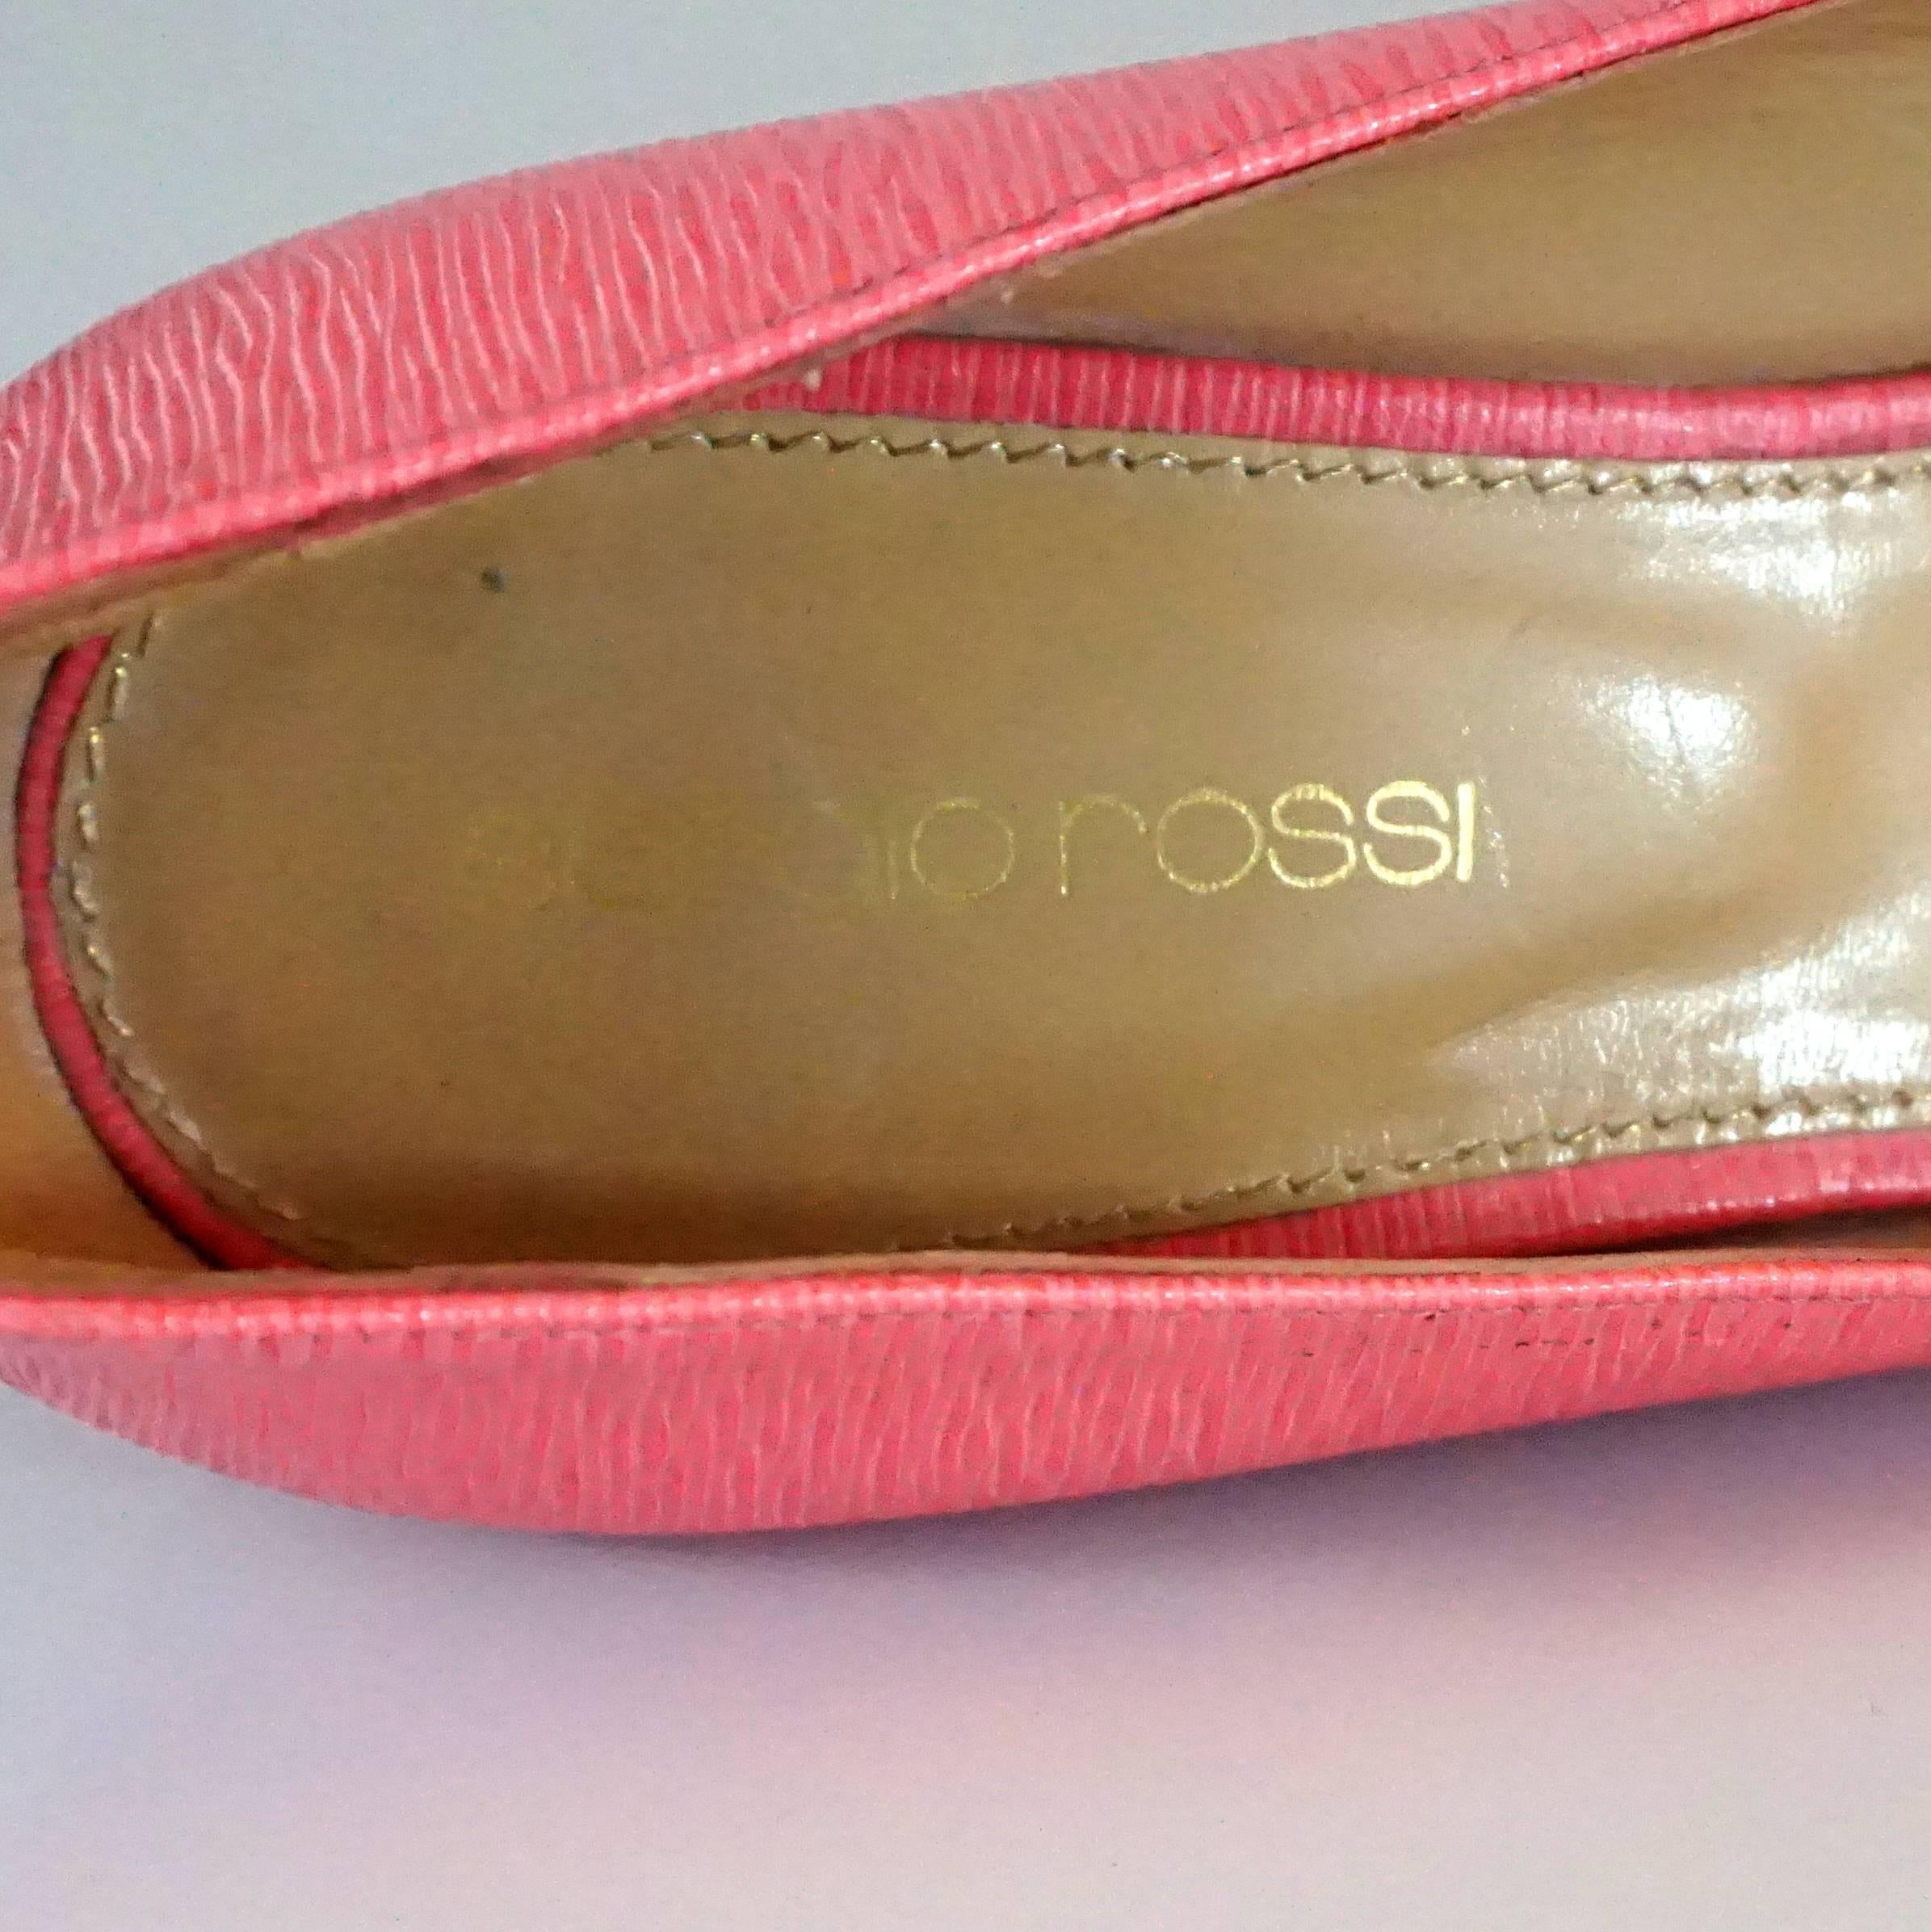 Sergio Rossi Pink Epi Leather Open Toe Wedges - 36.5 2